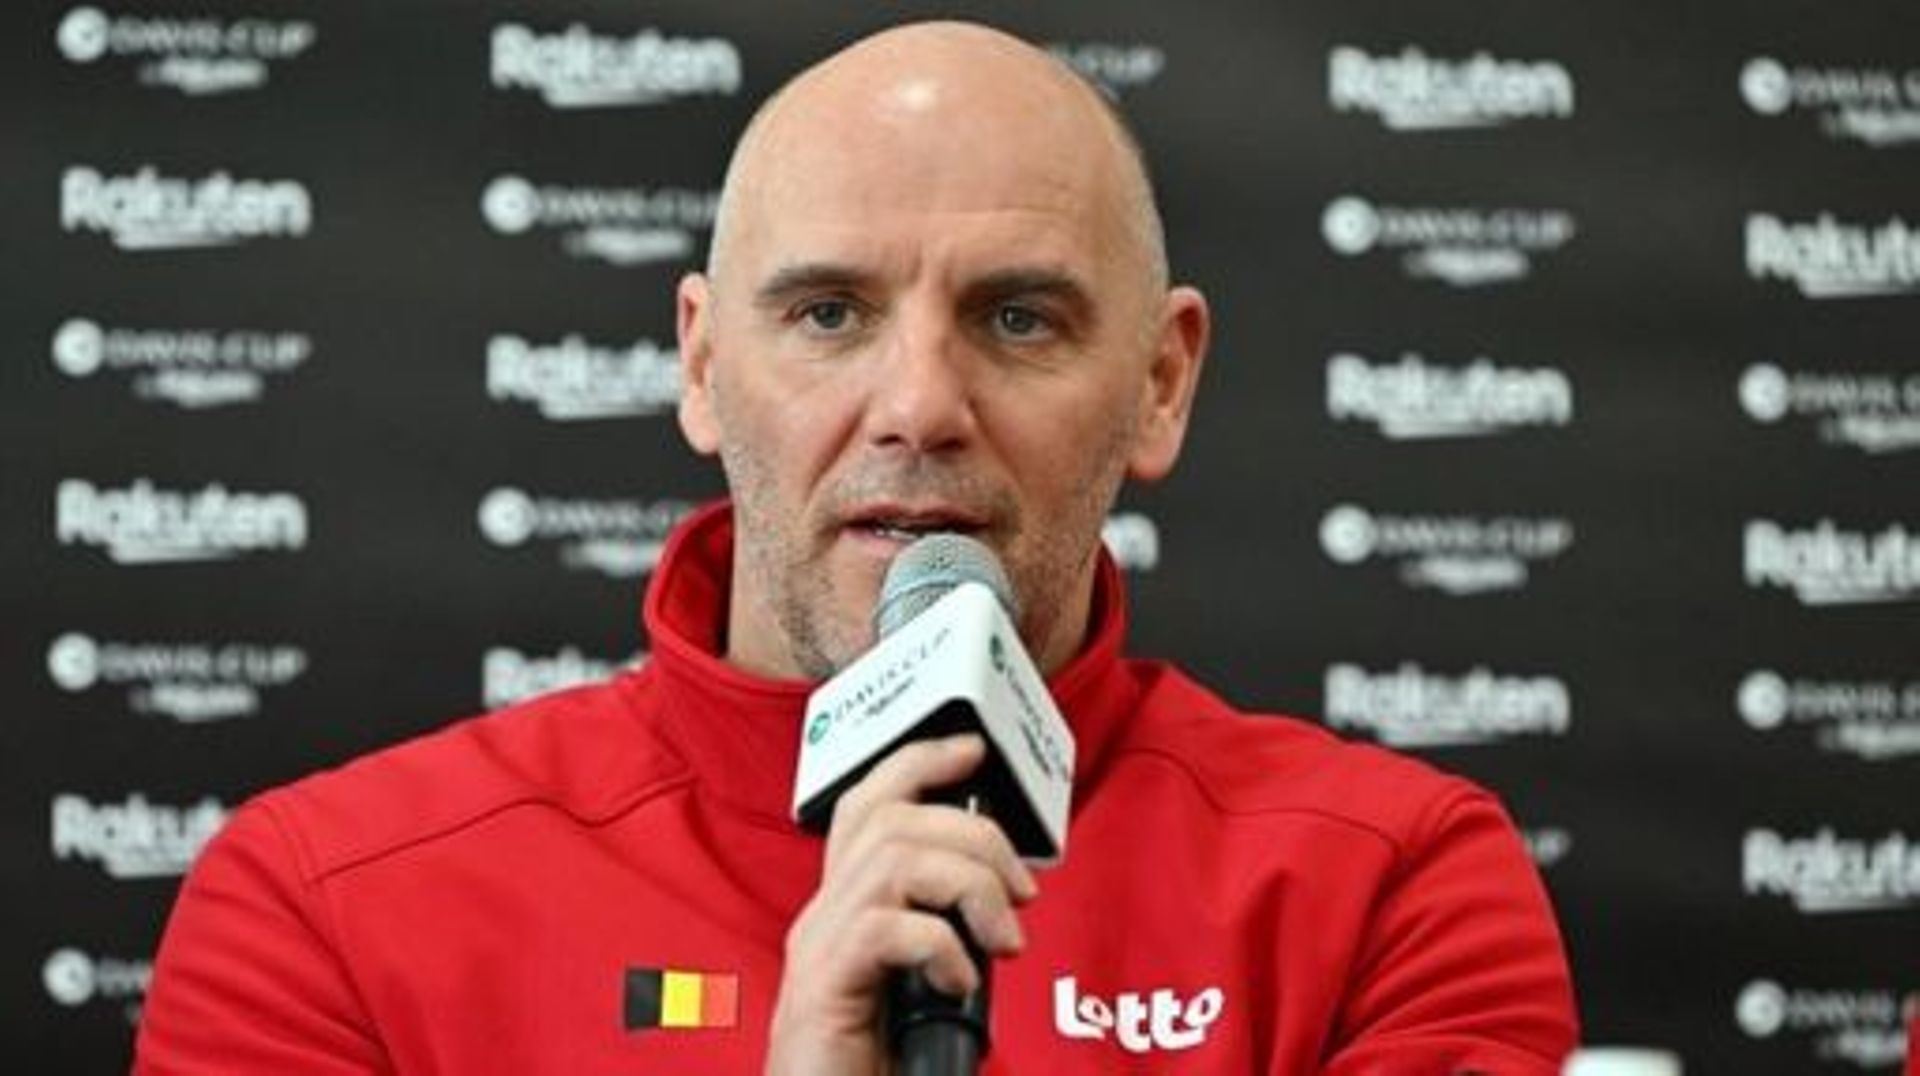 Belgium’s tennis team captain Johan Van Herck speaks during a pre-draw press conference of the Davis Cup qualifiers first round between South Korea and Belgium in Seoul on February 2, 2023. Jung Yeon-je / AFP